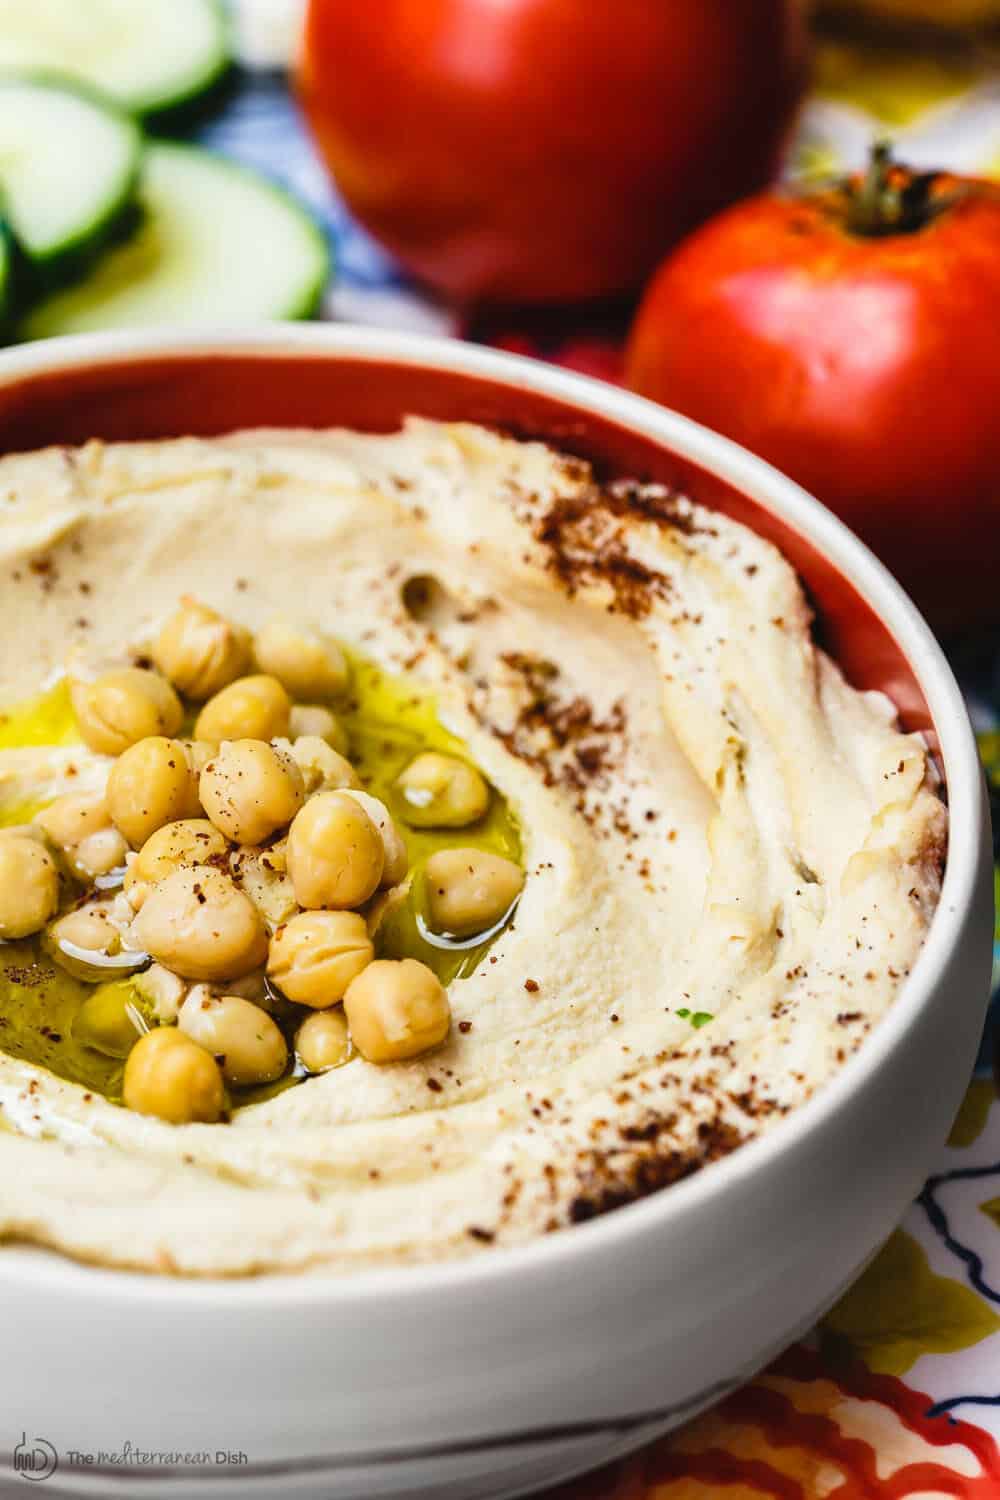 EASY HUMMUS RECIPE ( AUTHENTIC AND HOMEMADE ) - delish28